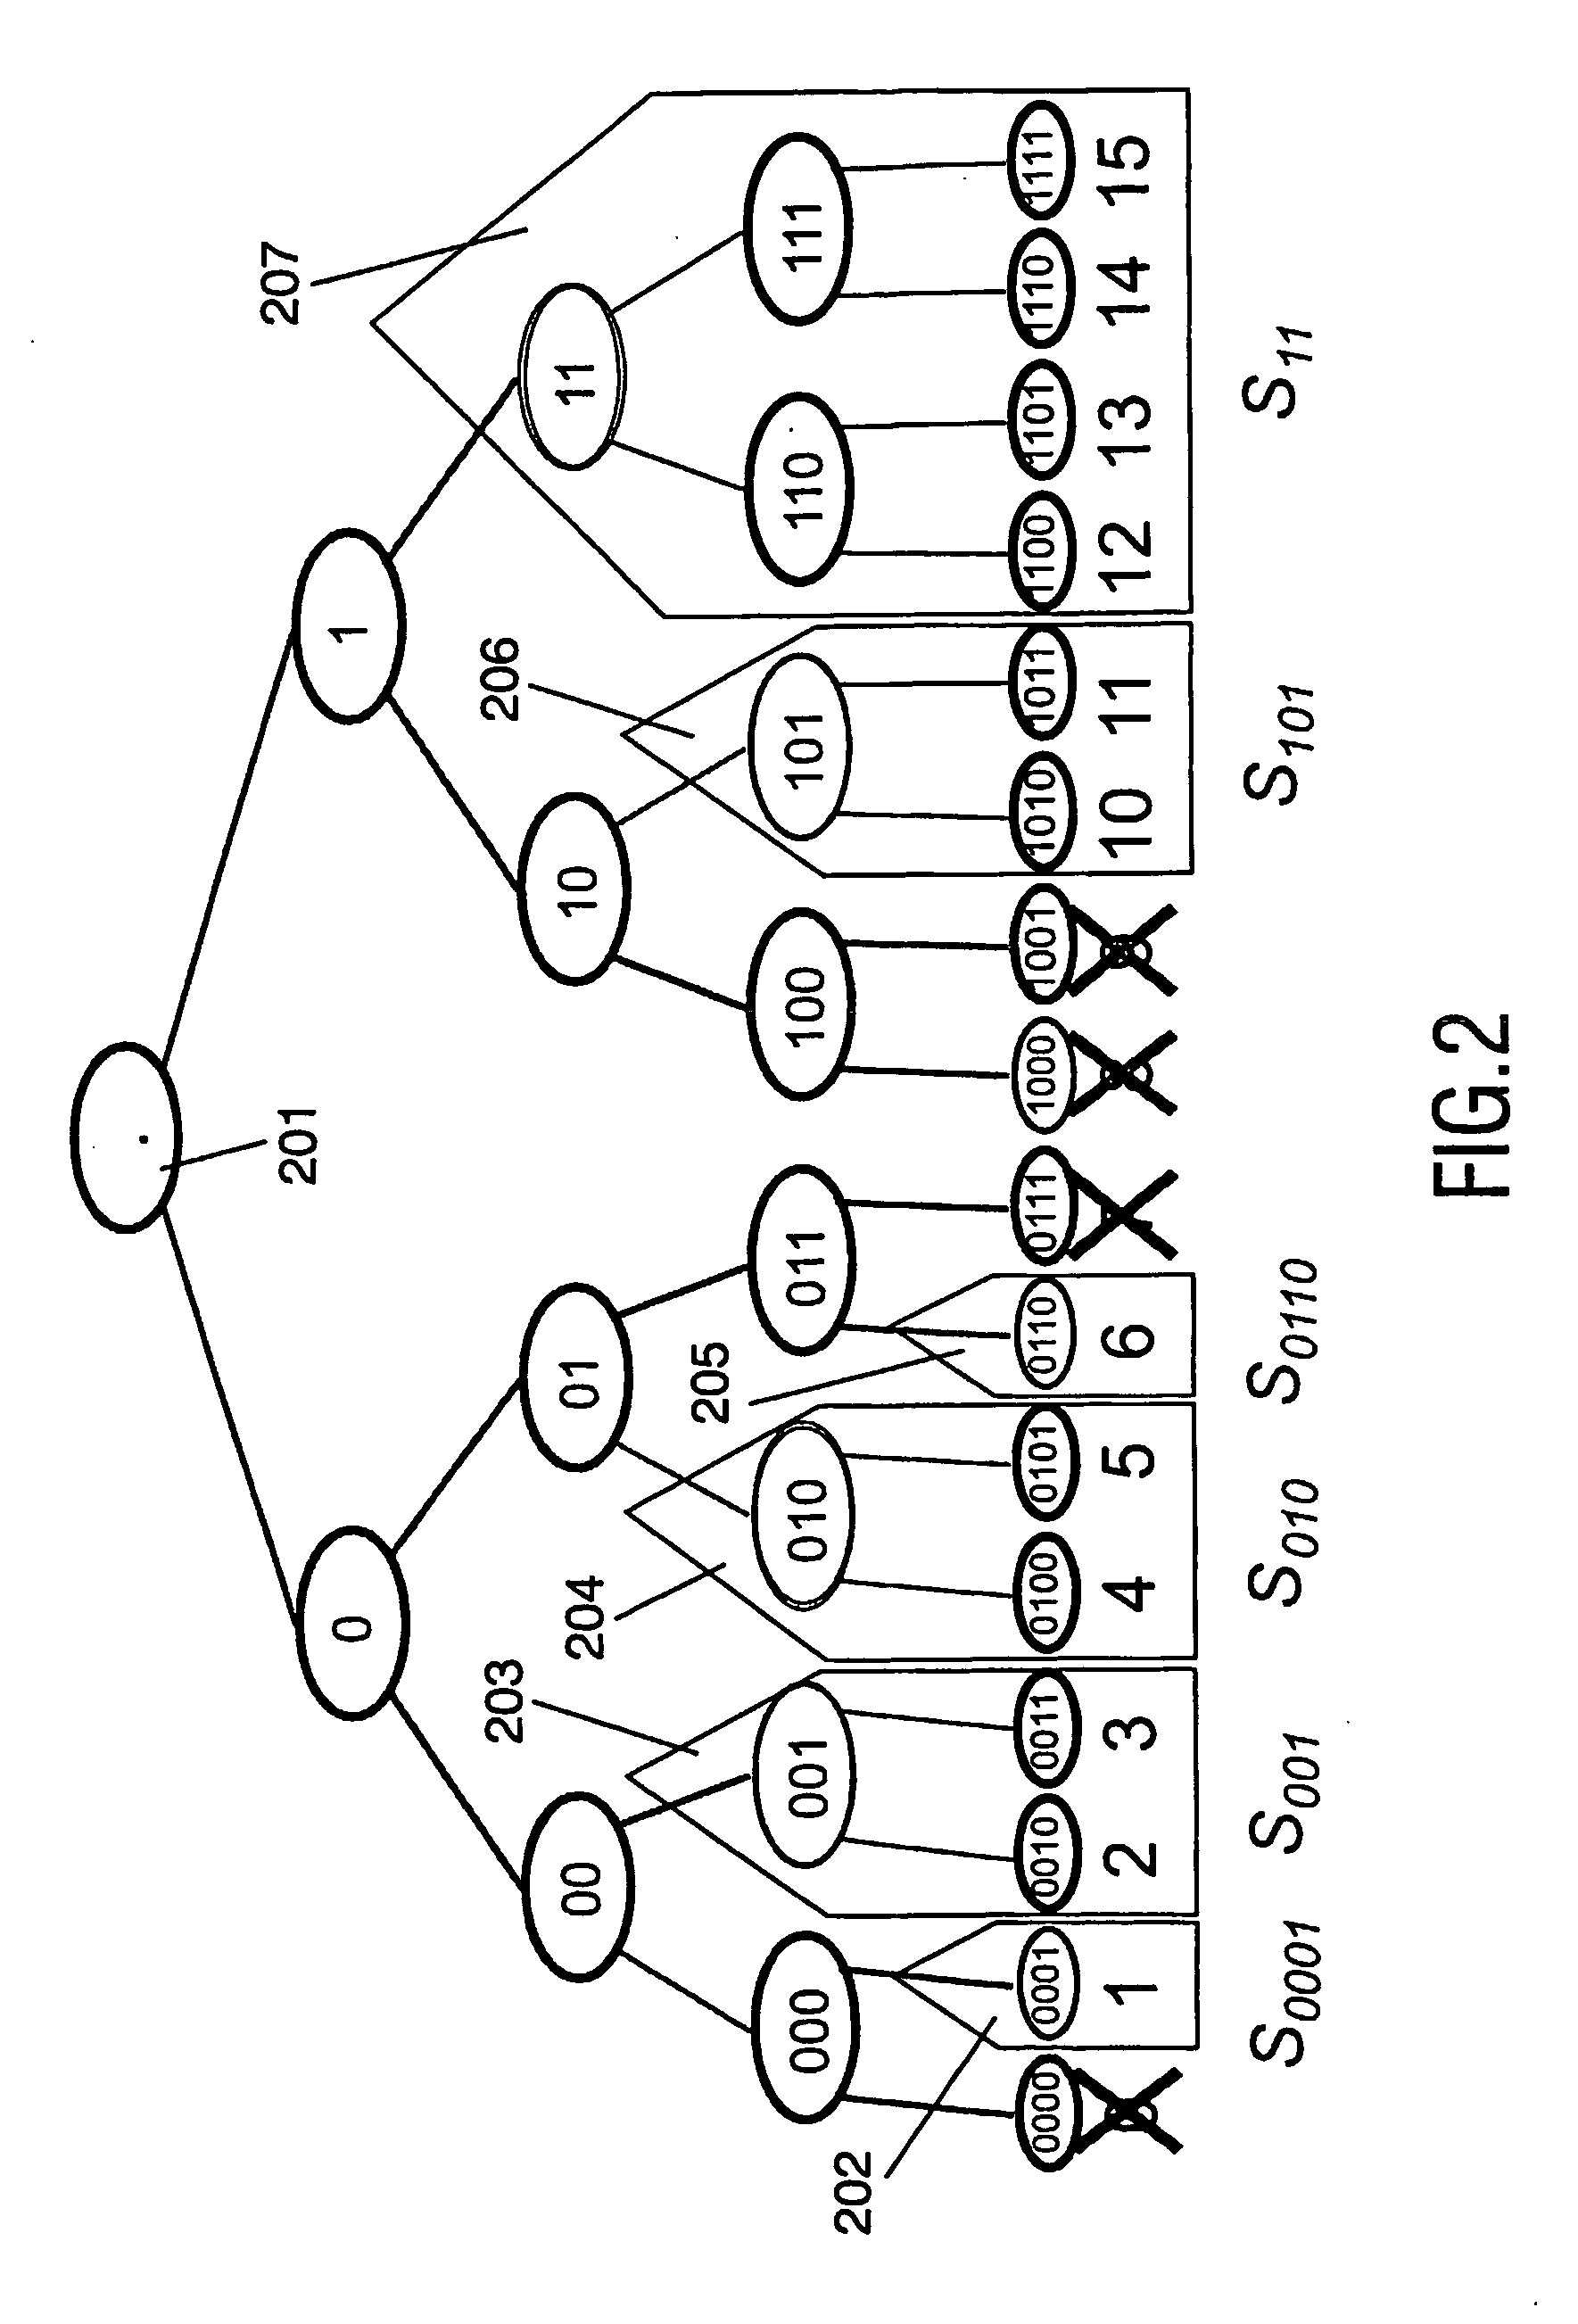 Method for authentication between devices